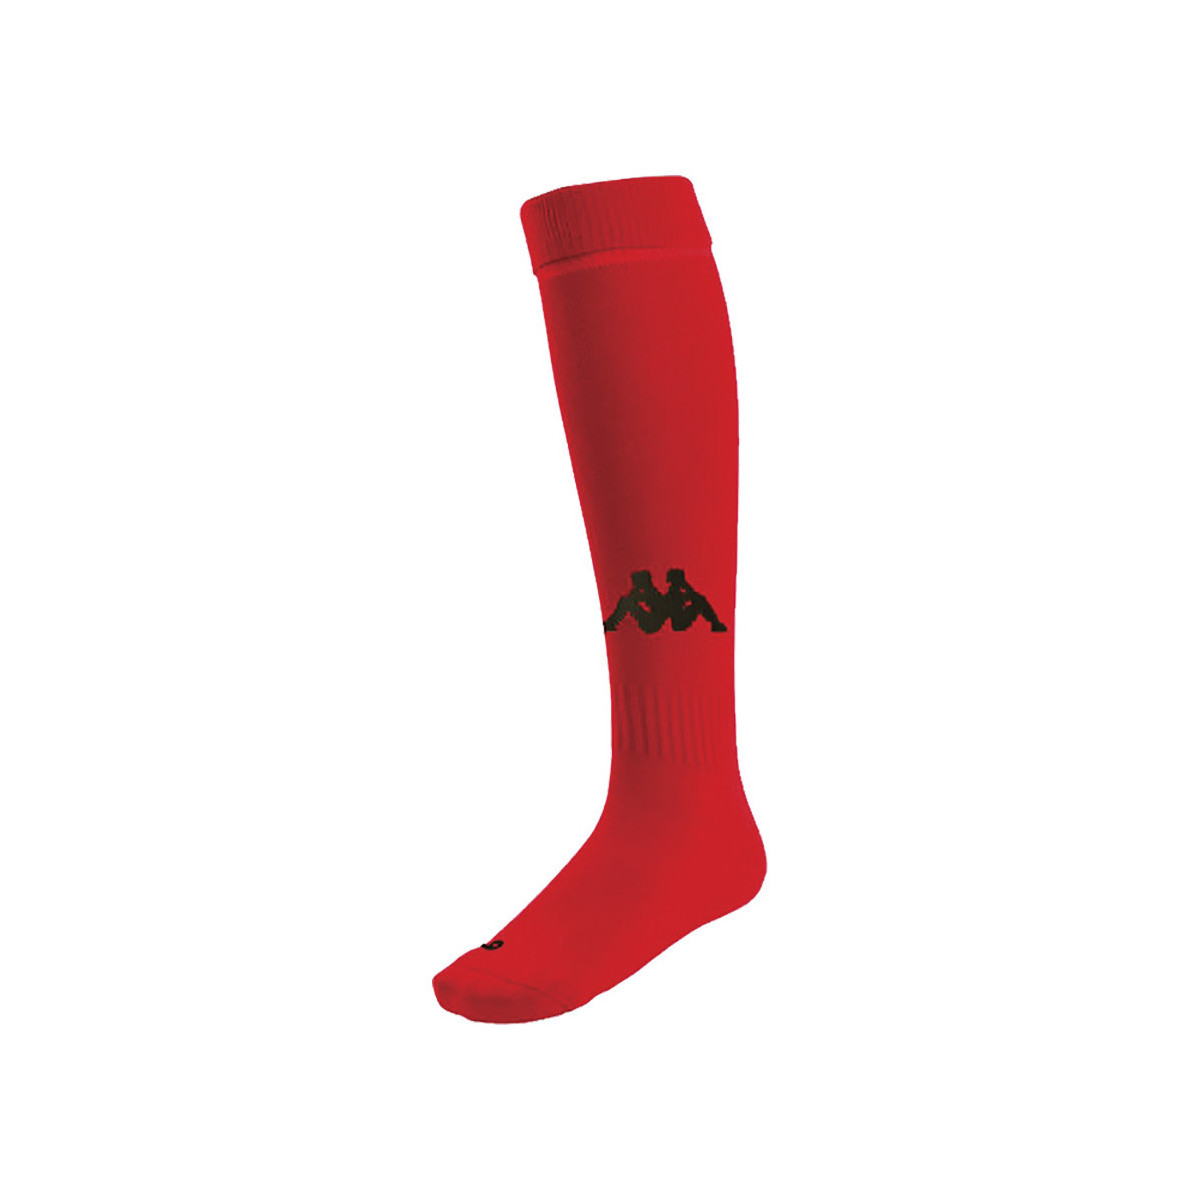 Kappa Rouge Chaussettes Penao (3 paires) NEAEIPAN